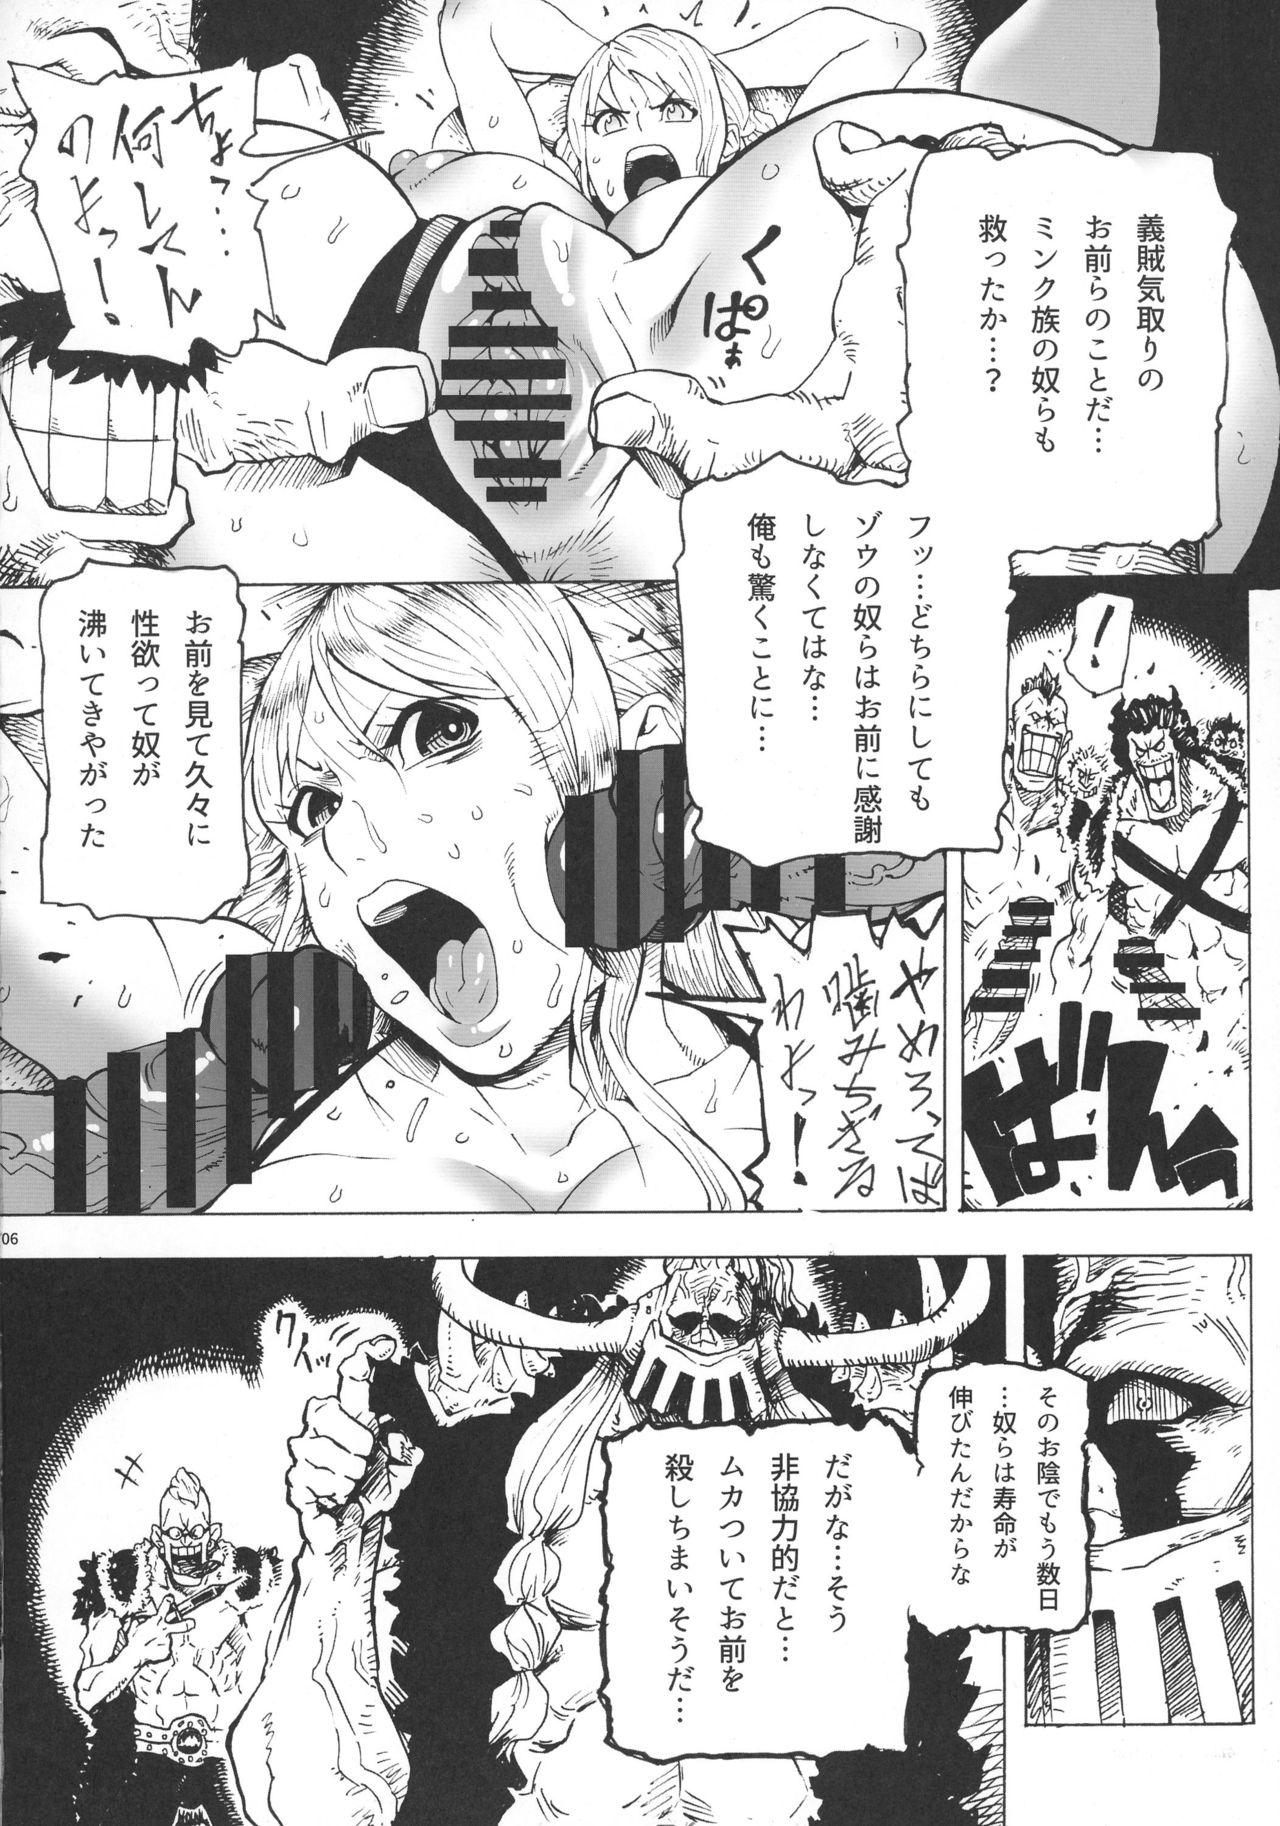 Dominant P.O.M Another Episode "J.A.C.K" - One piece Private - Page 8